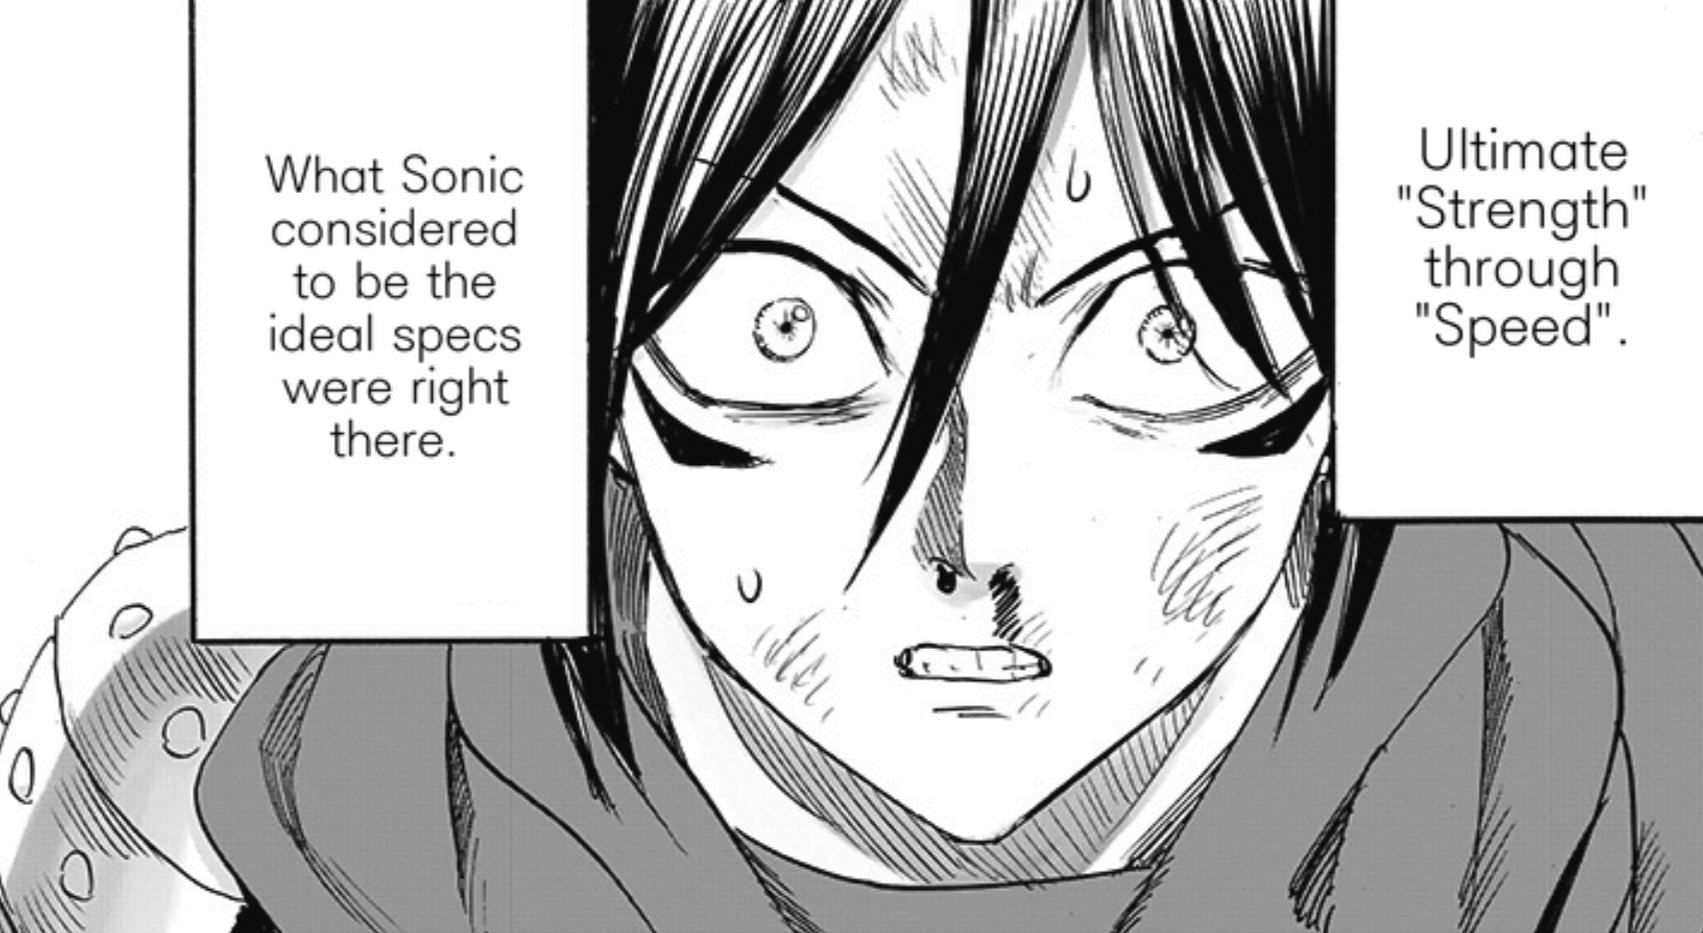 Speed-o&#039;- Sound Sonic as seen in One Punch Man chapter 199 (Image via Shueisha)